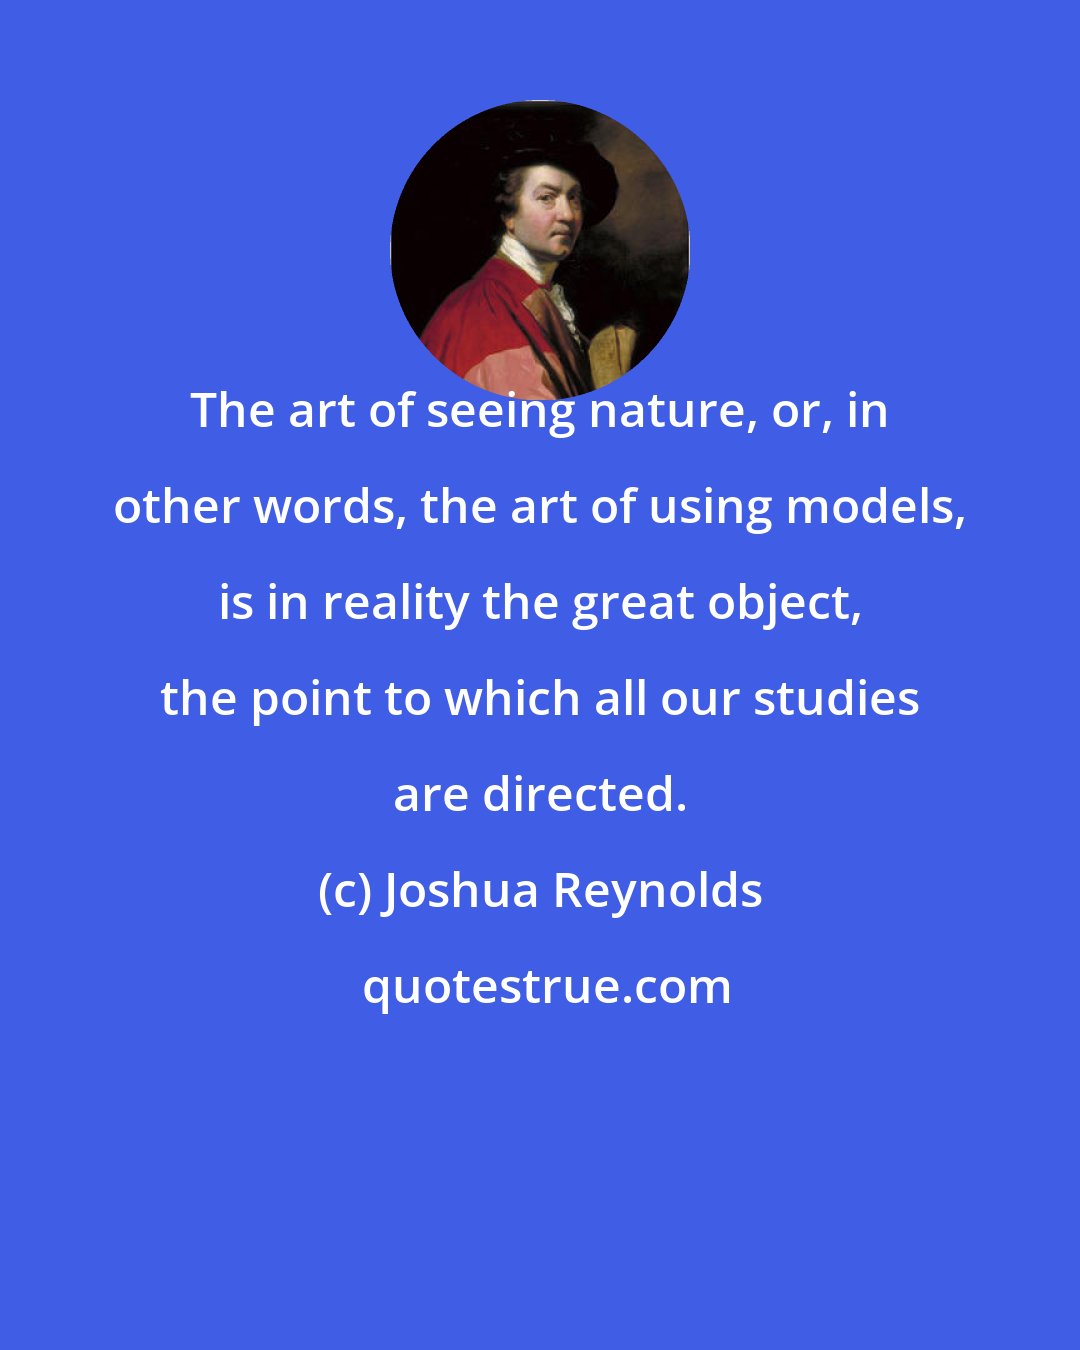 Joshua Reynolds: The art of seeing nature, or, in other words, the art of using models, is in reality the great object, the point to which all our studies are directed.